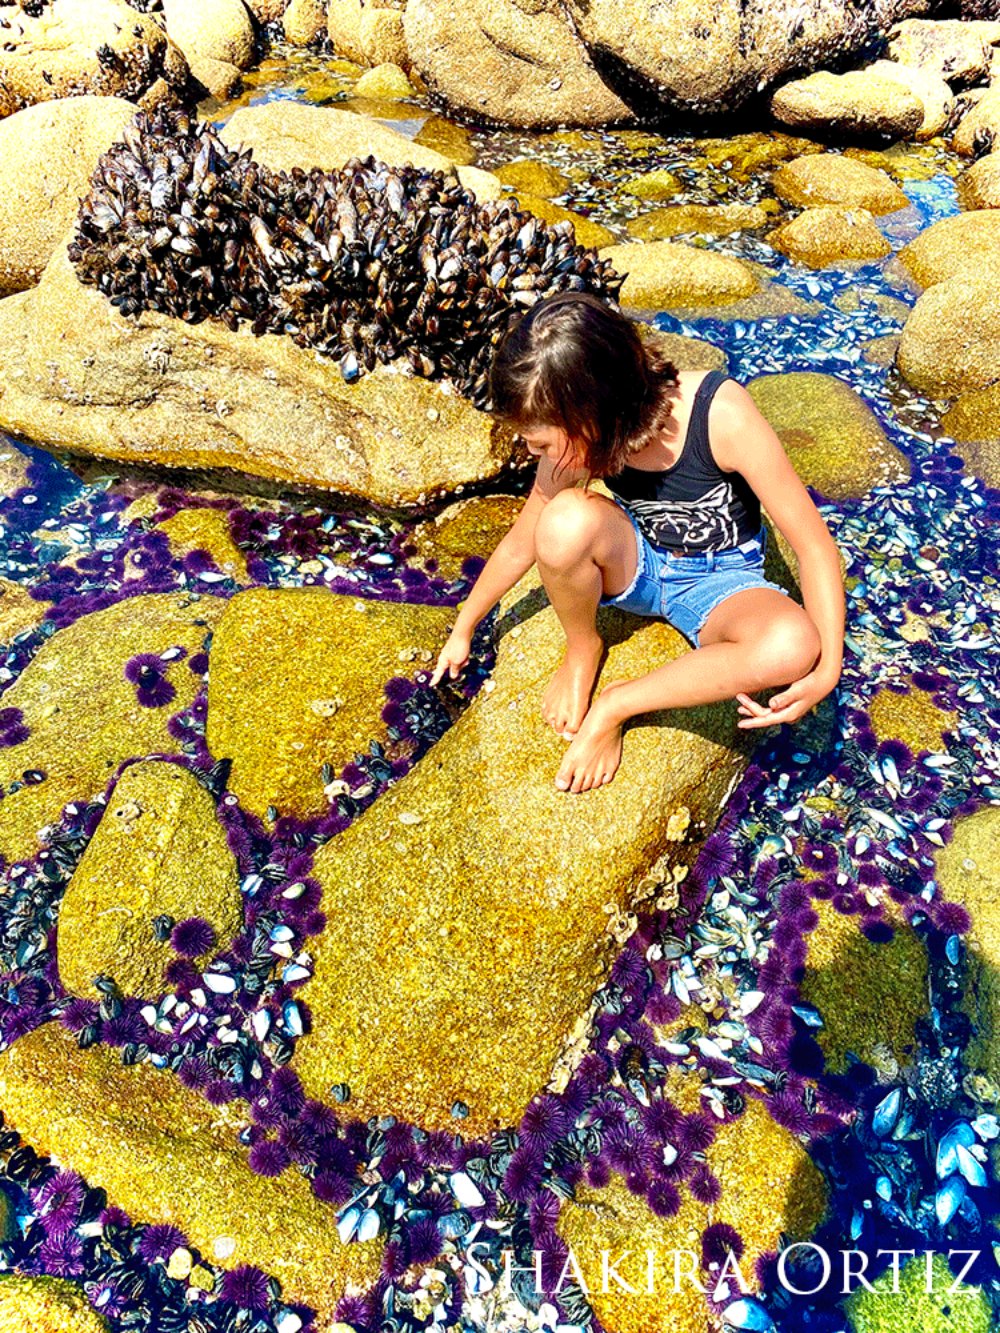 Child on rocks surrounded by tide pools filled with purple sea urchins.